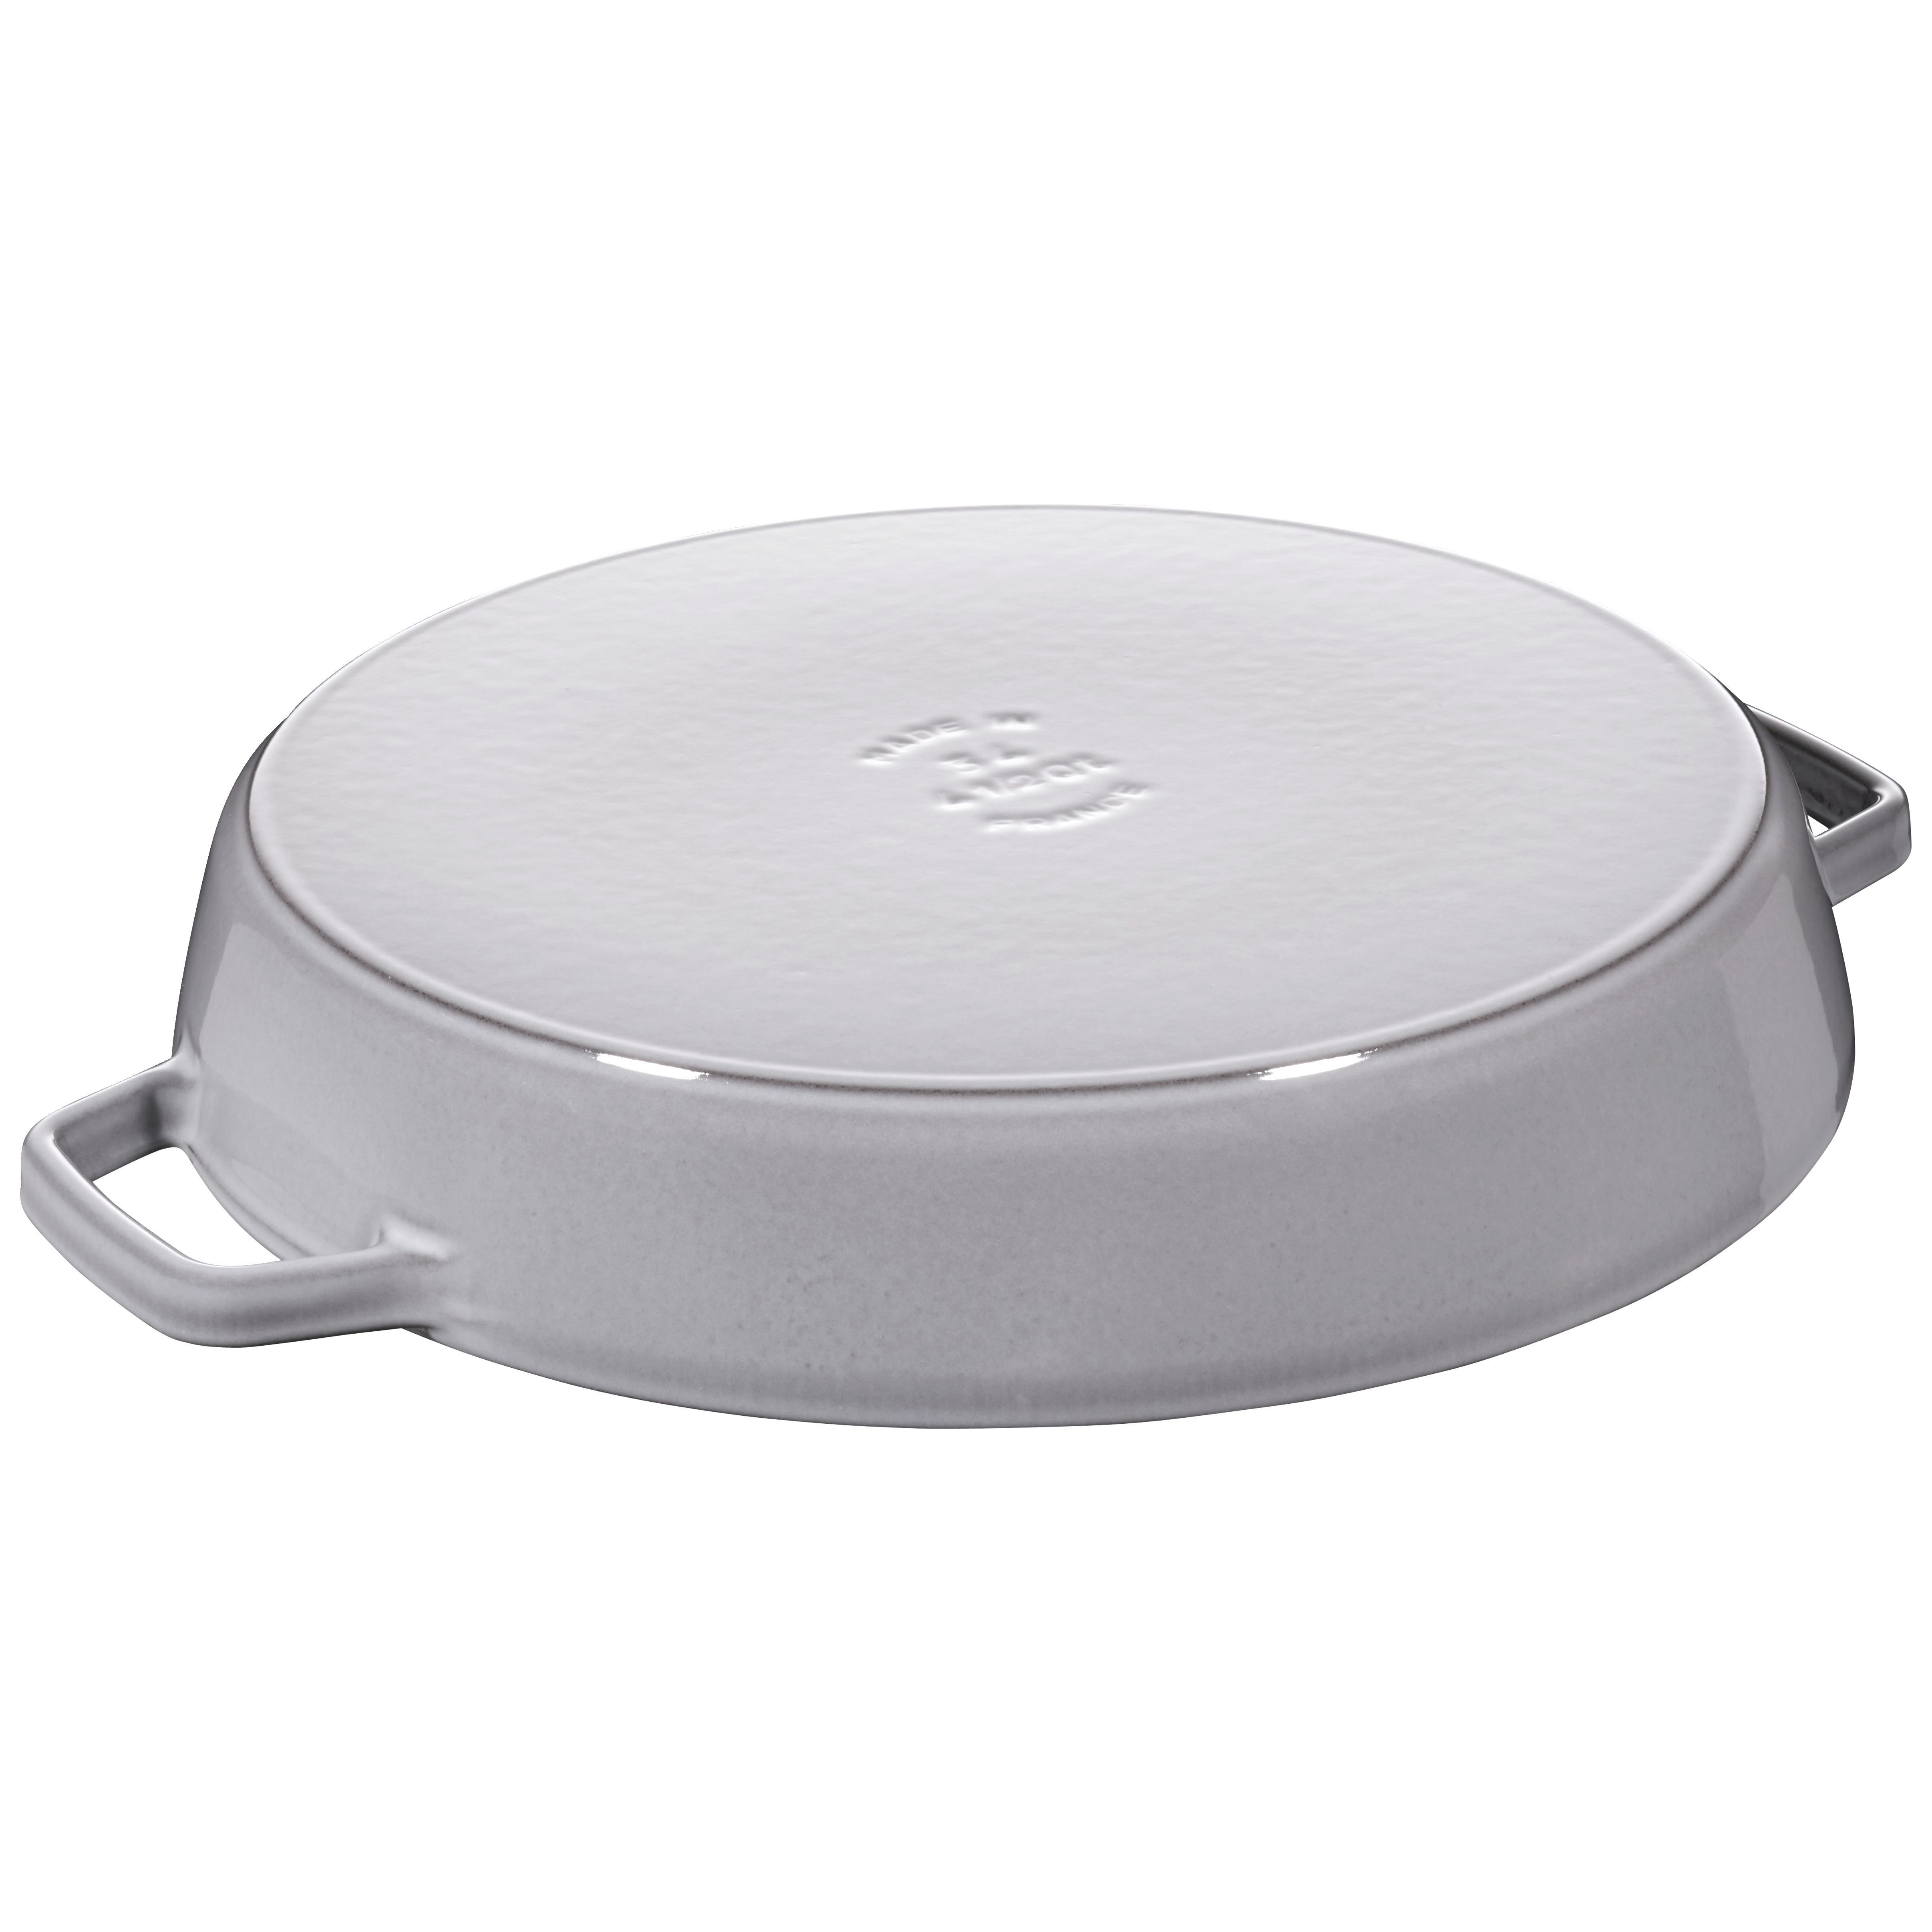 Staub Cast Iron - Fry Pans/ Skillets 18.25 inch x 9.5-inch, Double Burner  Griddle / Plancha